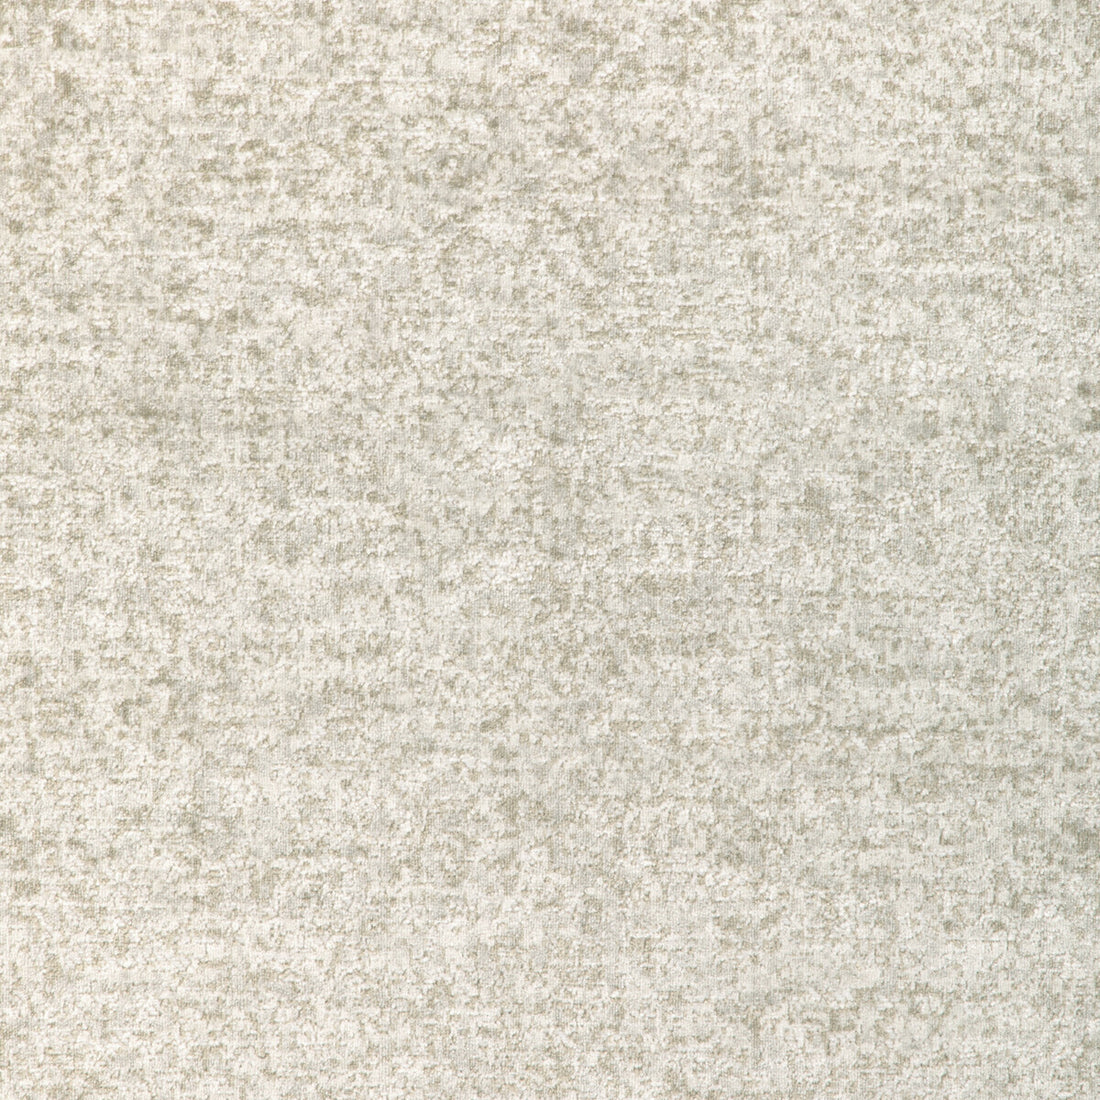 Giusuppe fabric in sand color - pattern 36954.16.0 - by Kravet Basics in the Mid-Century Modern collection